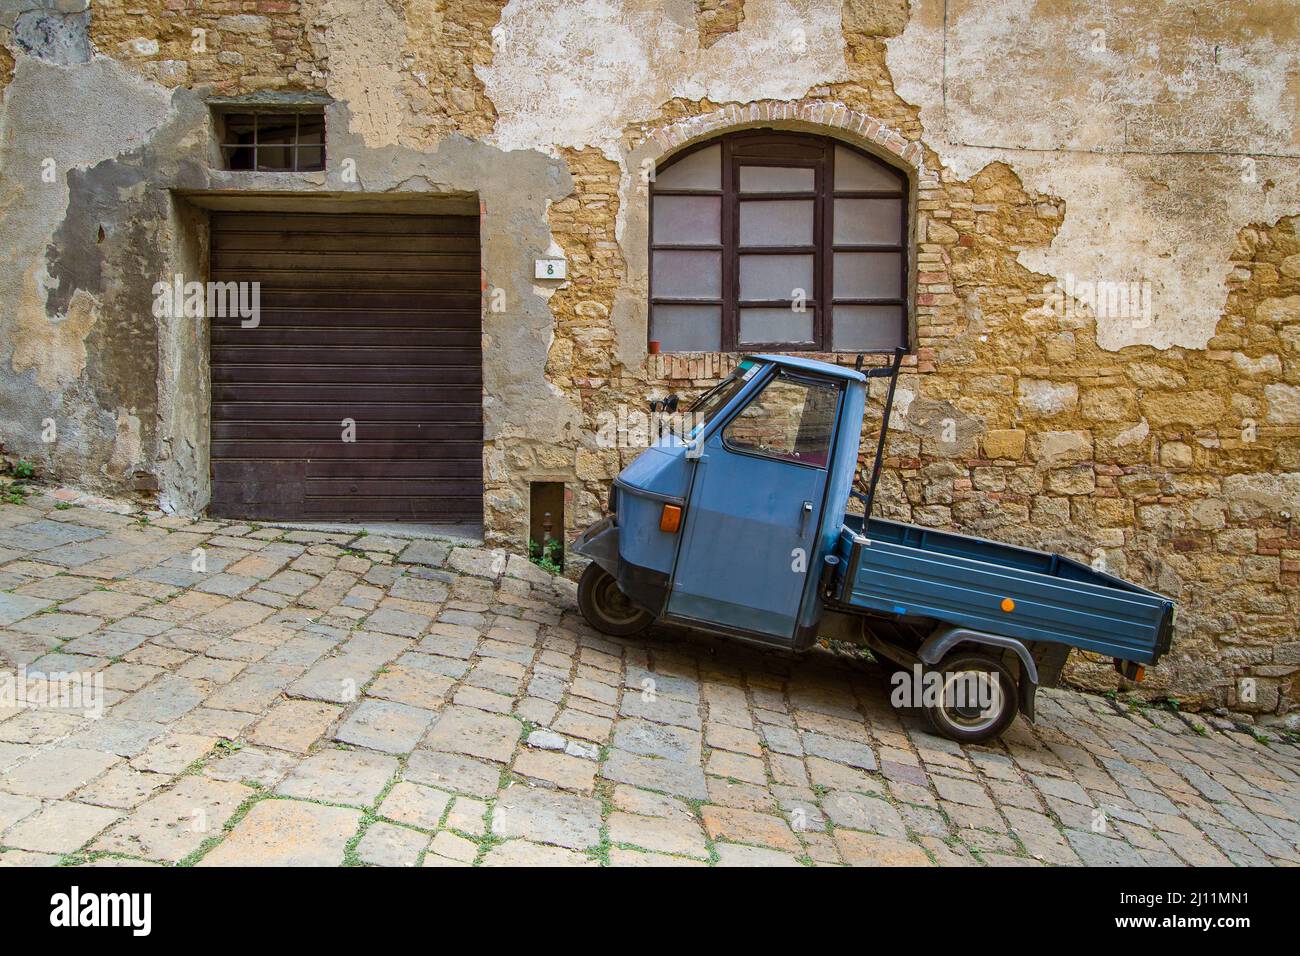 Stereotype scene on the streets of Volterra with a parked Piaggio Ape in front of an old rural building Stock Photo